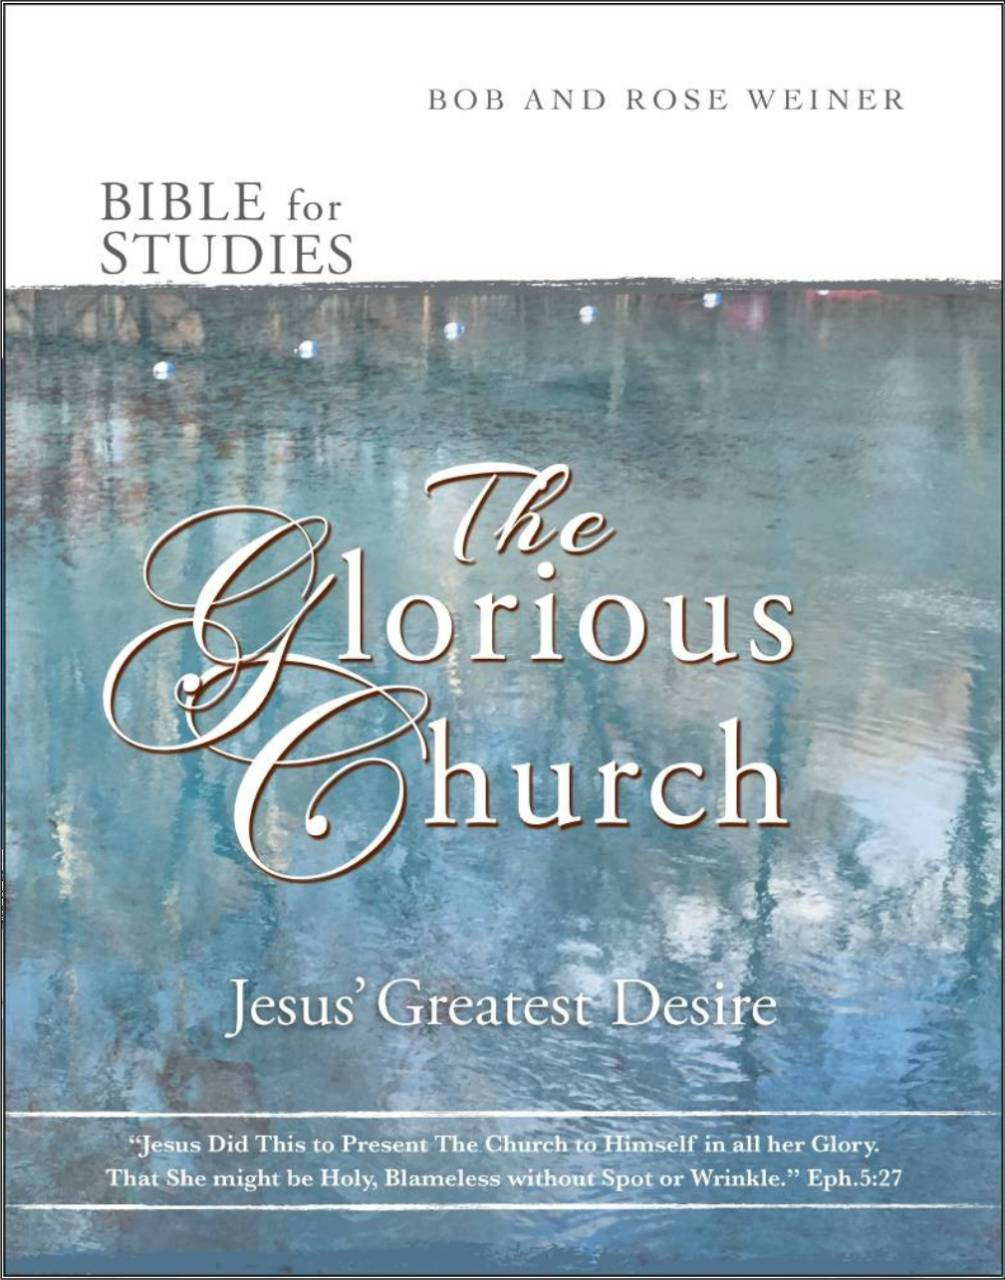 Bible Studies for the Glorious Church